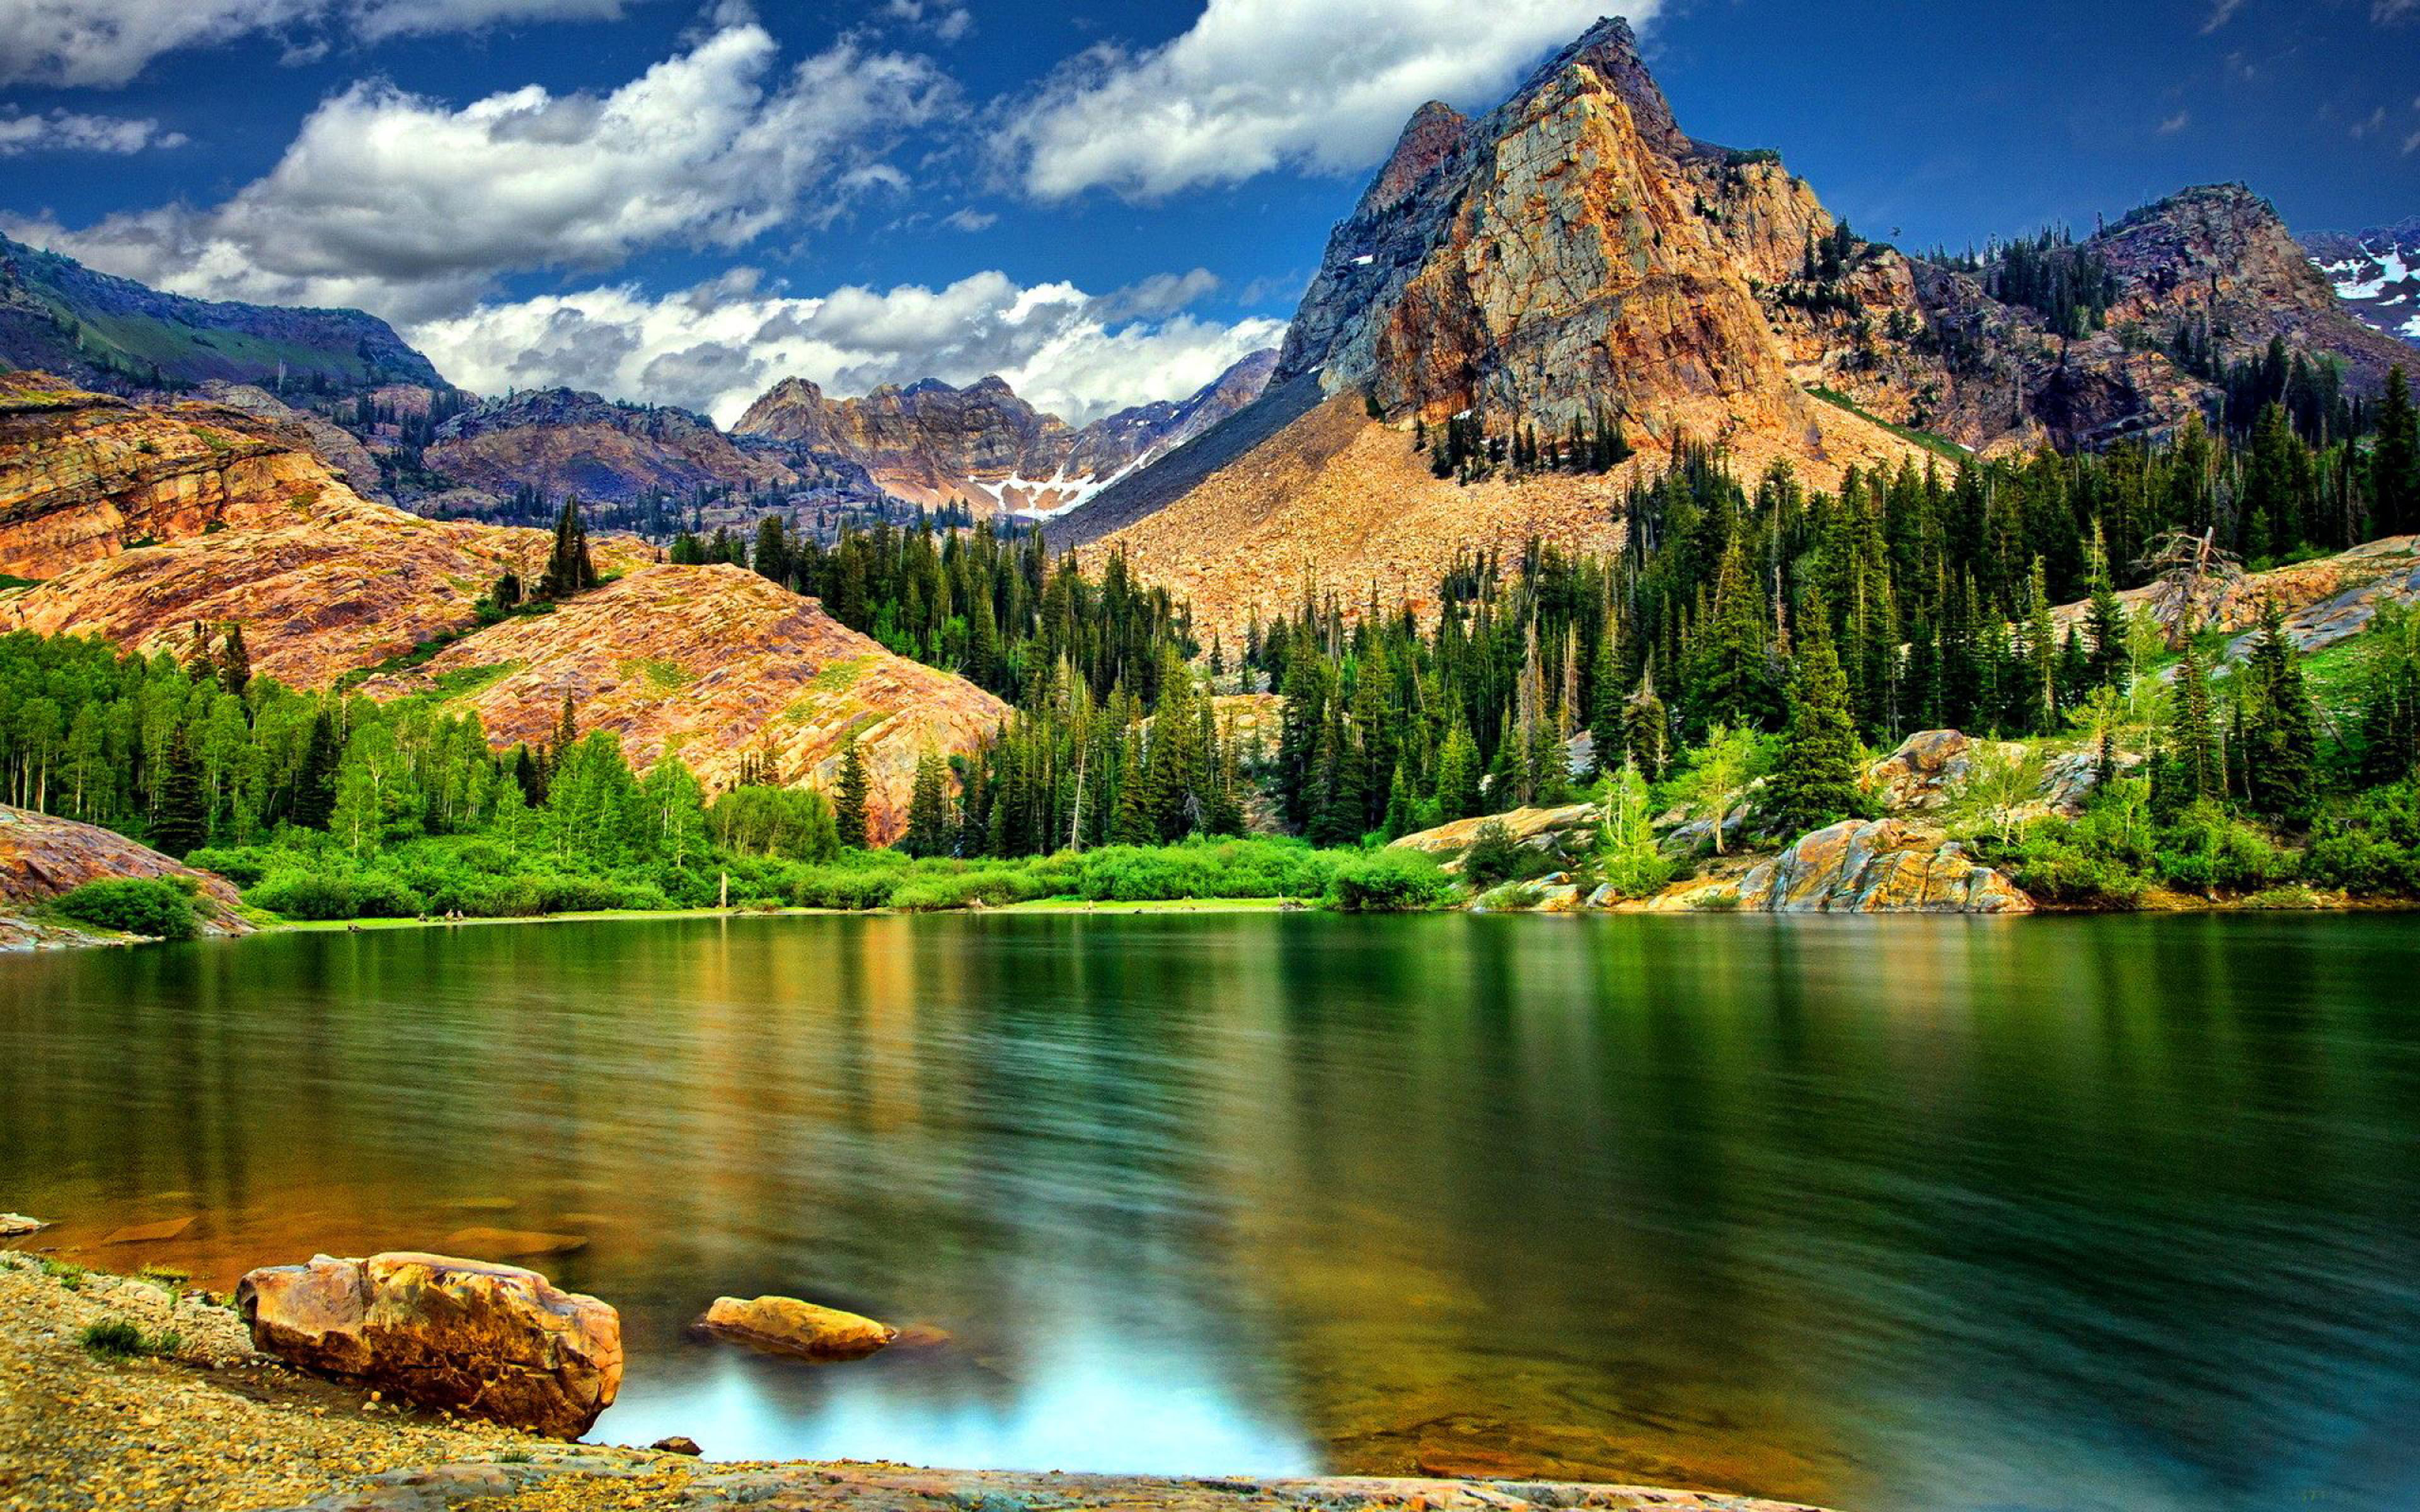 Landscape-nature-rocky mountains with jagged peaks-pine trees-mountain